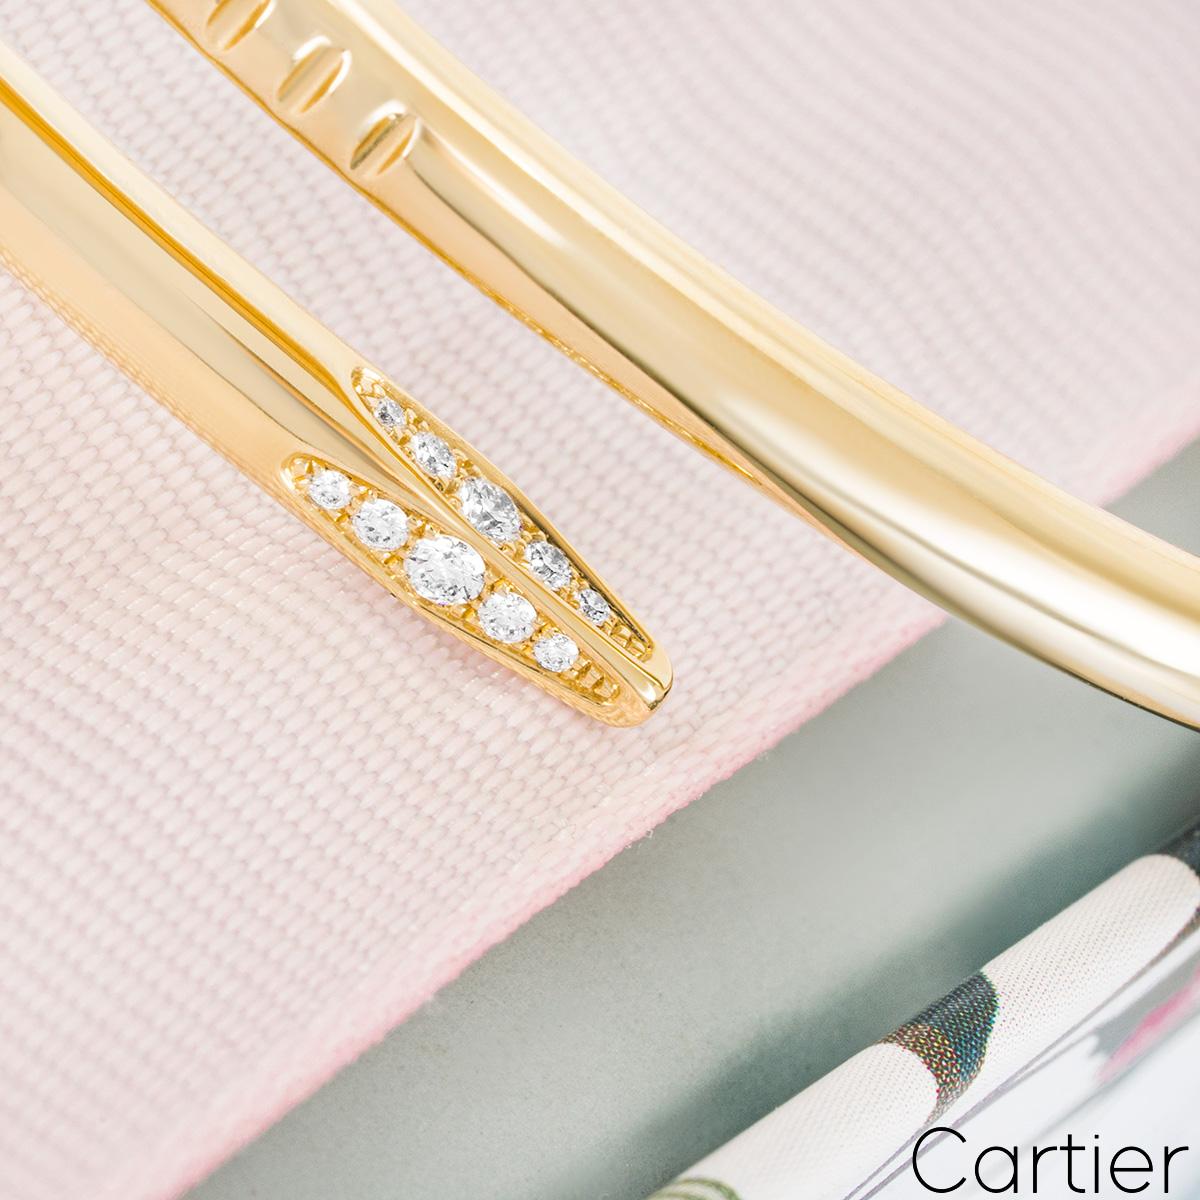 Cartier Yellow Gold Diamond Juste Un Clou Bracelet Size 17 B6048617 In Excellent Condition For Sale In London, GB